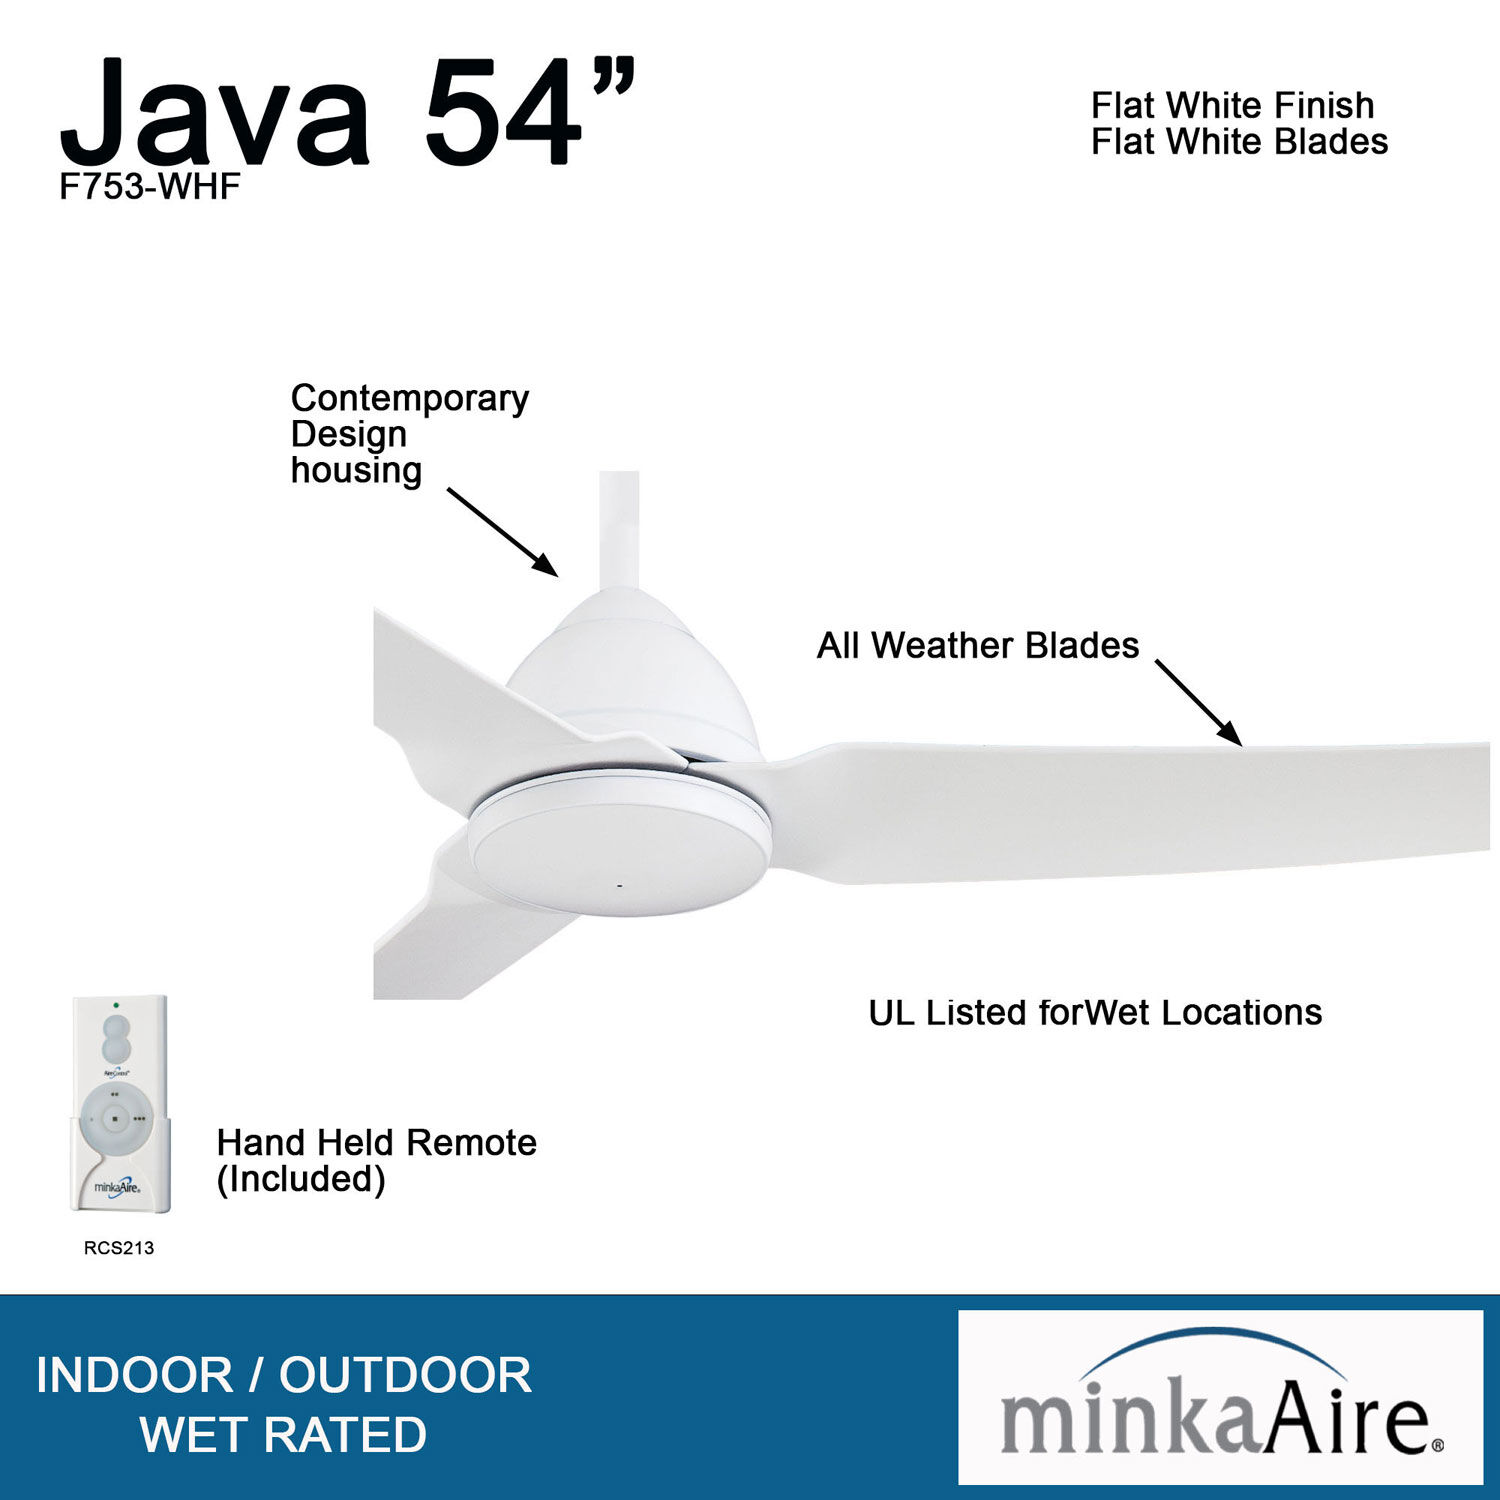 Minka Aire F753-WHF Flat White Indoor/Outdoor 54" Java Ceiling Fan w/Remote 